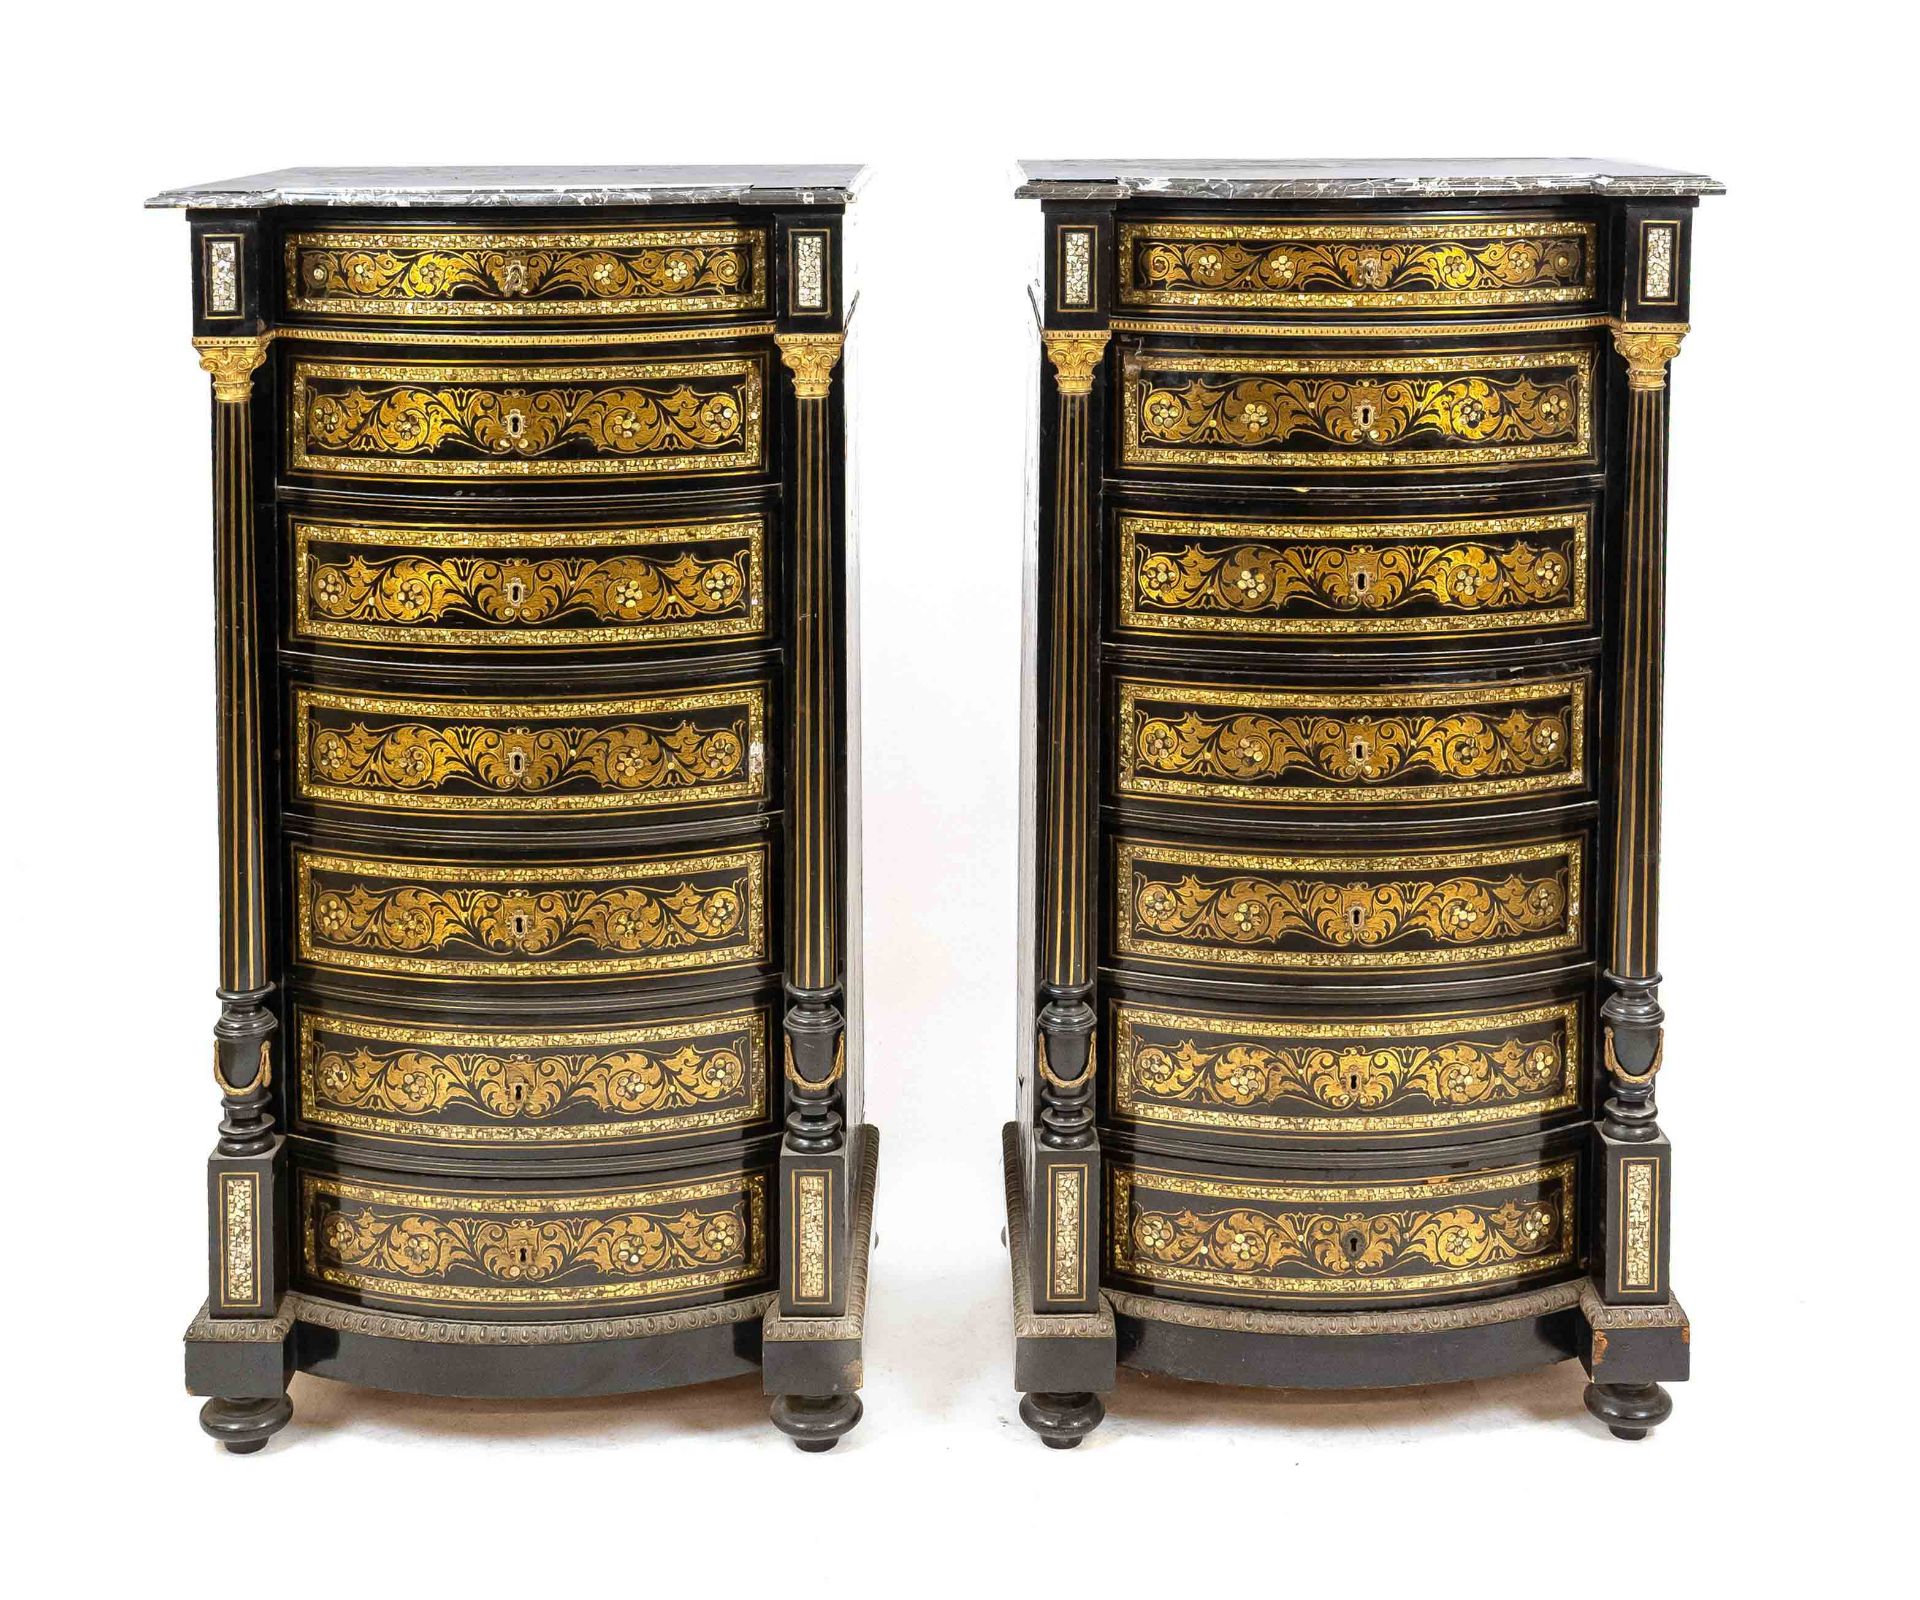 Pair of chiffroniers, 19th c., black lacquered wood, brass and mother-of-pearl inlays on the